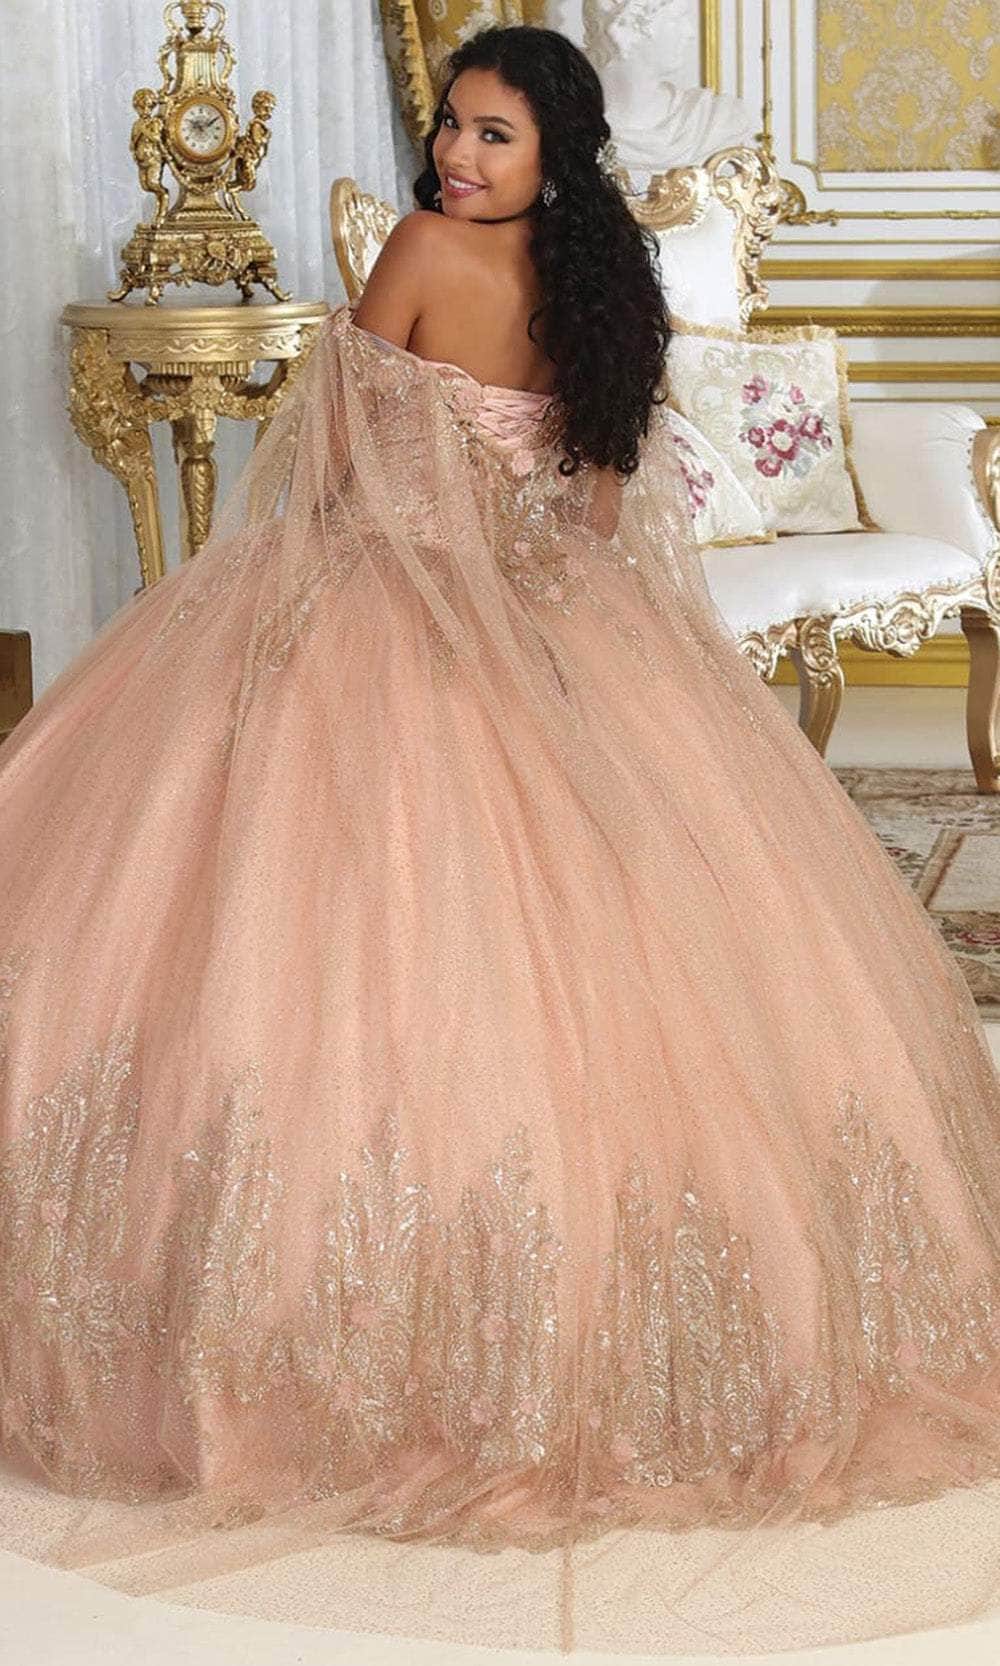 May Queen LK211 - Cape Sleeve Floral Ballgown Quinceanera Dresses 